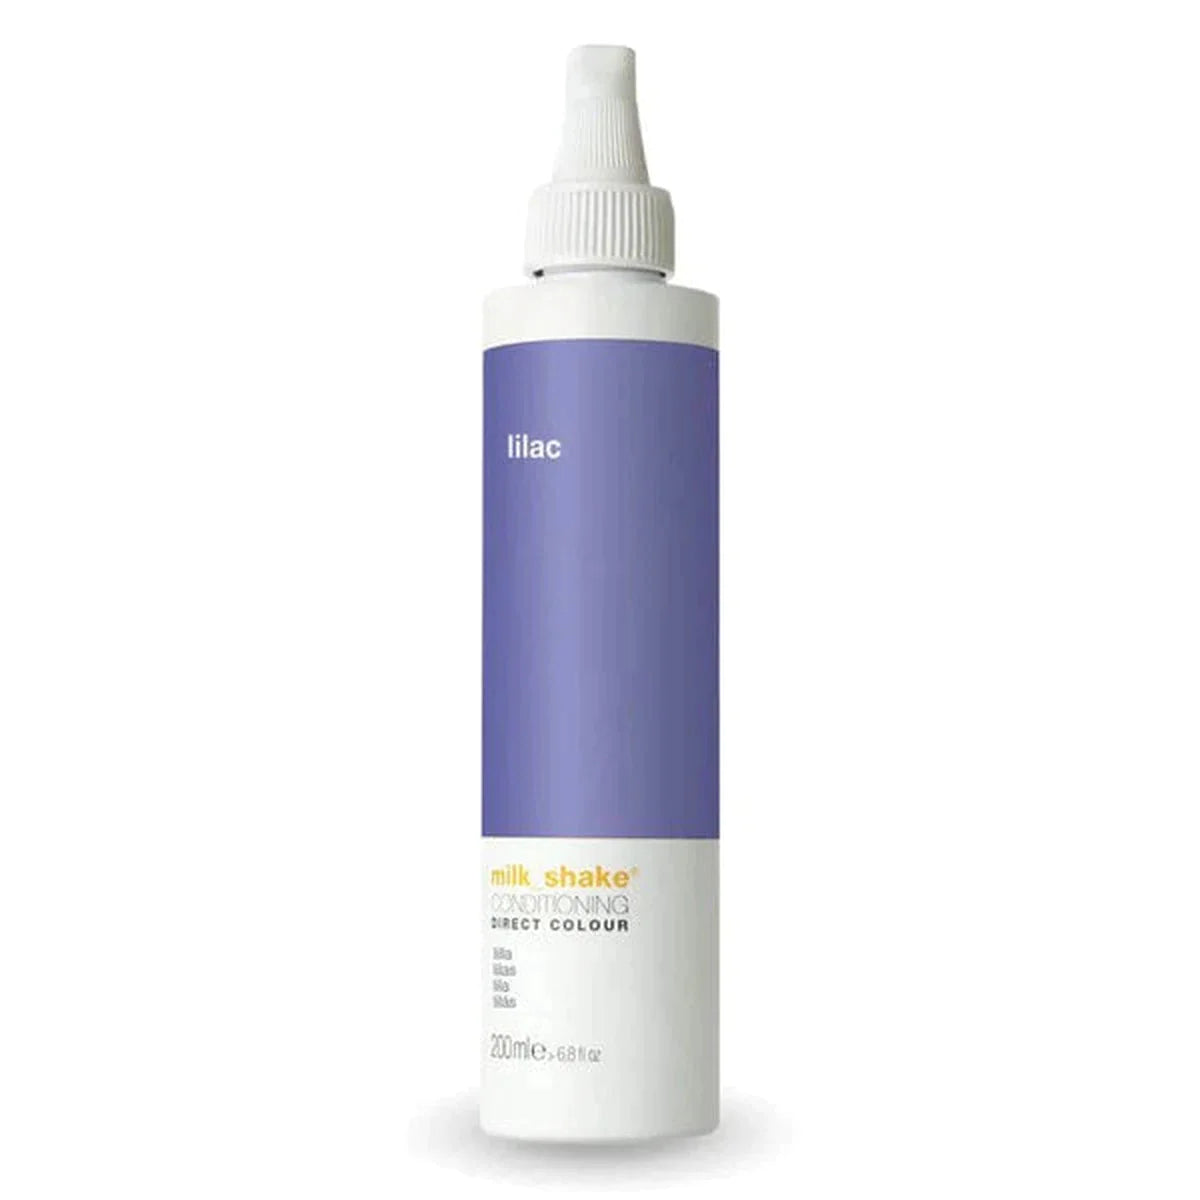 Milkshake Conditioning Direct Colour 200ml Lilac Finesthair